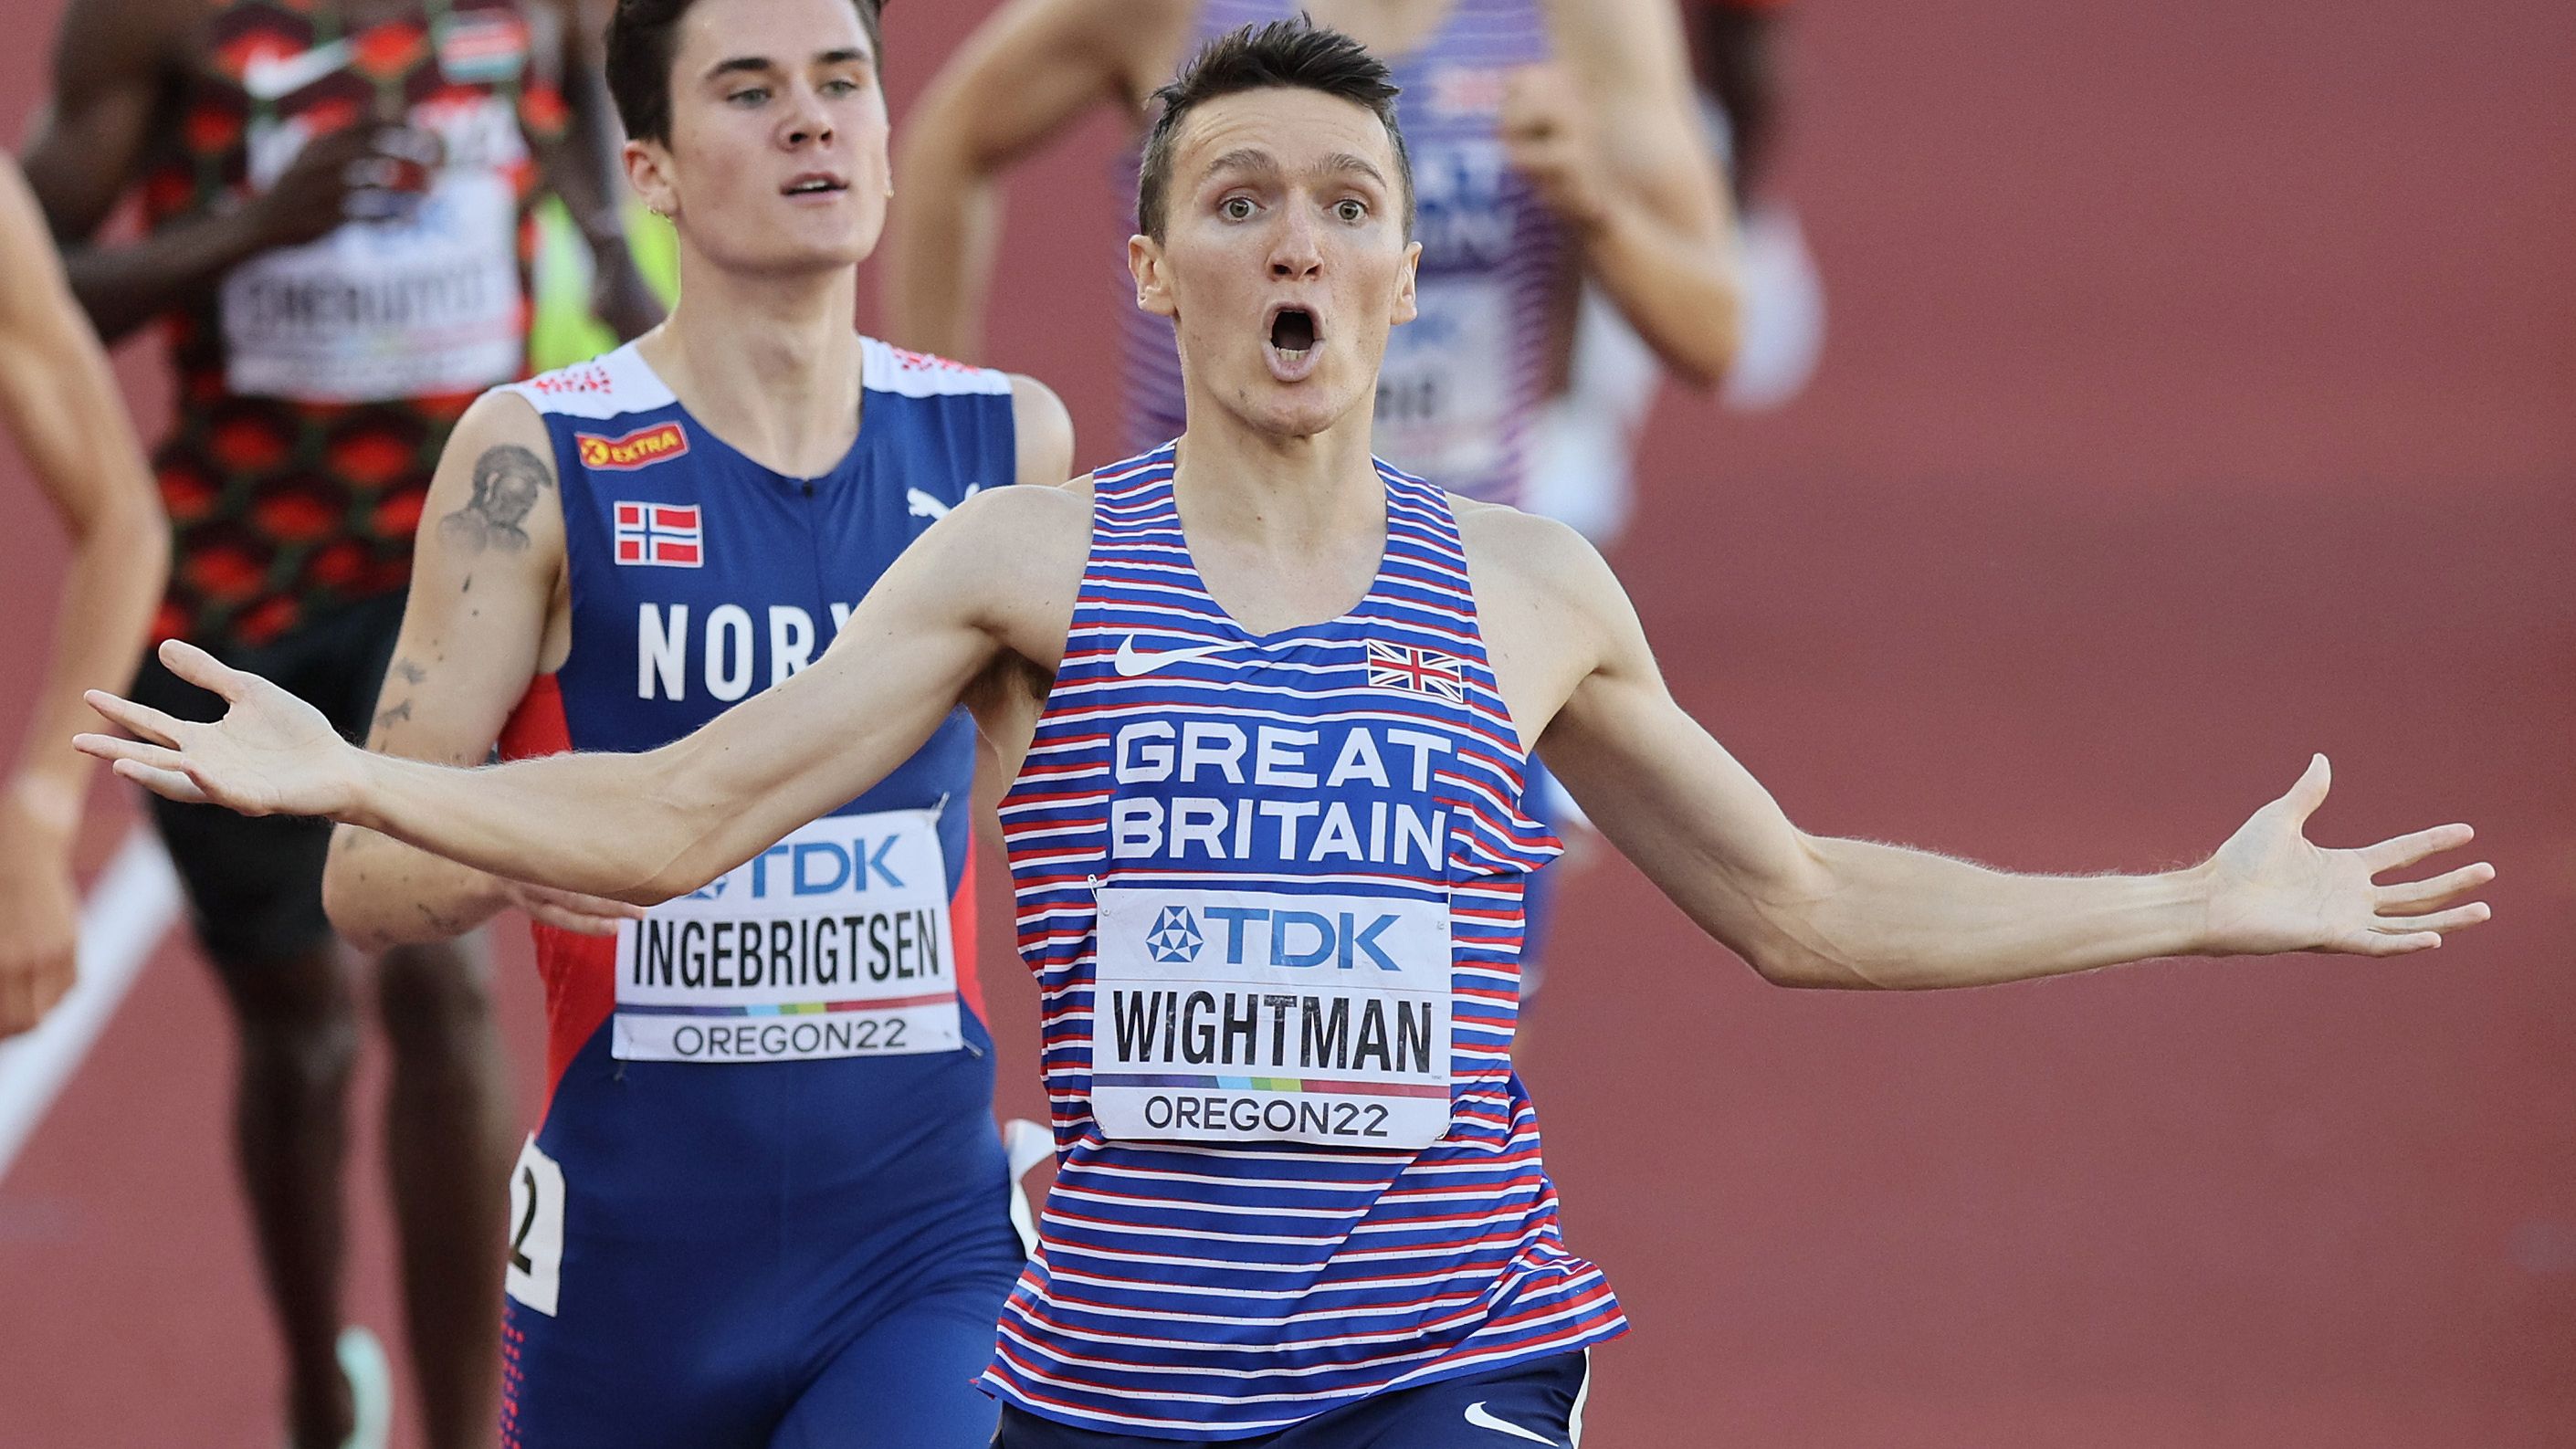 Jake Wightman pulls off 'crazy' underdog win at World Athletics Championships as dad calls race